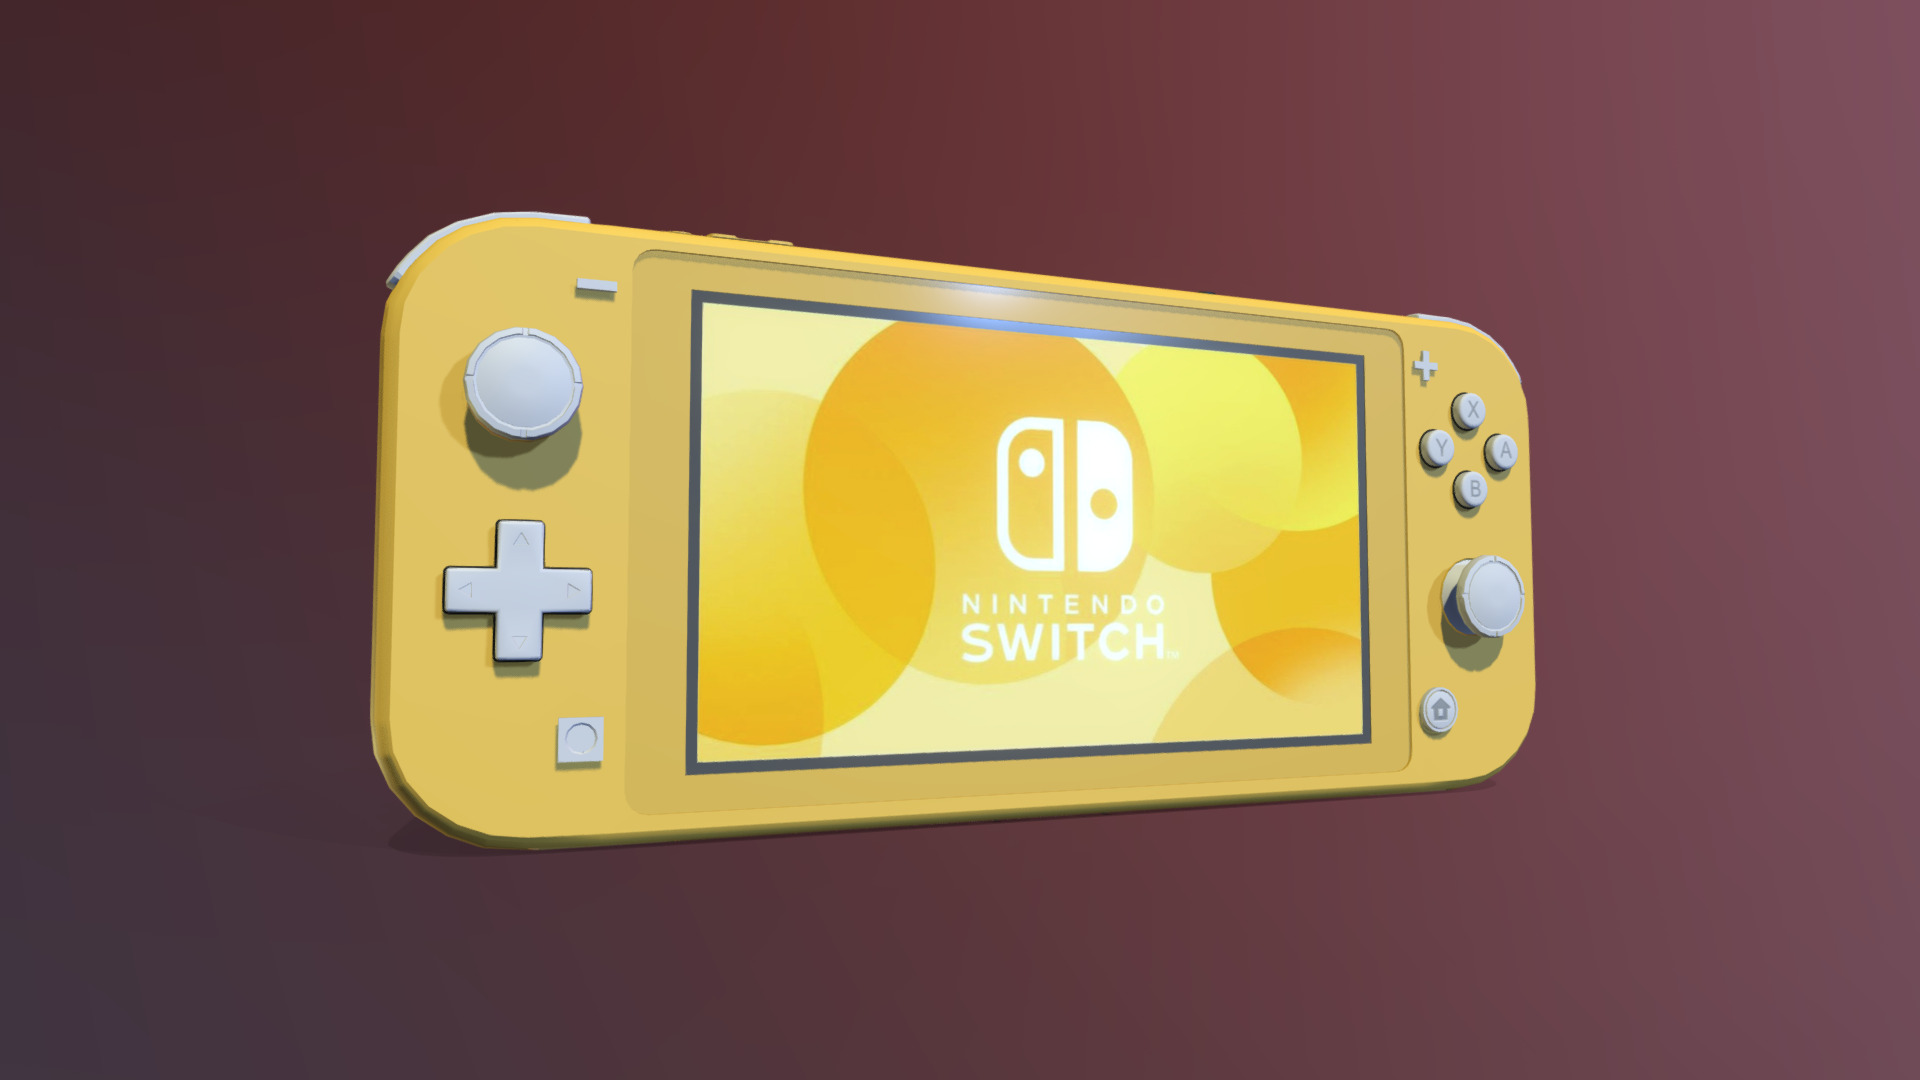 3D model Nintendo Switch Lite – Yellow - This is a 3D model of the Nintendo Switch Lite - Yellow. The 3D model is about a yellow rectangular device.